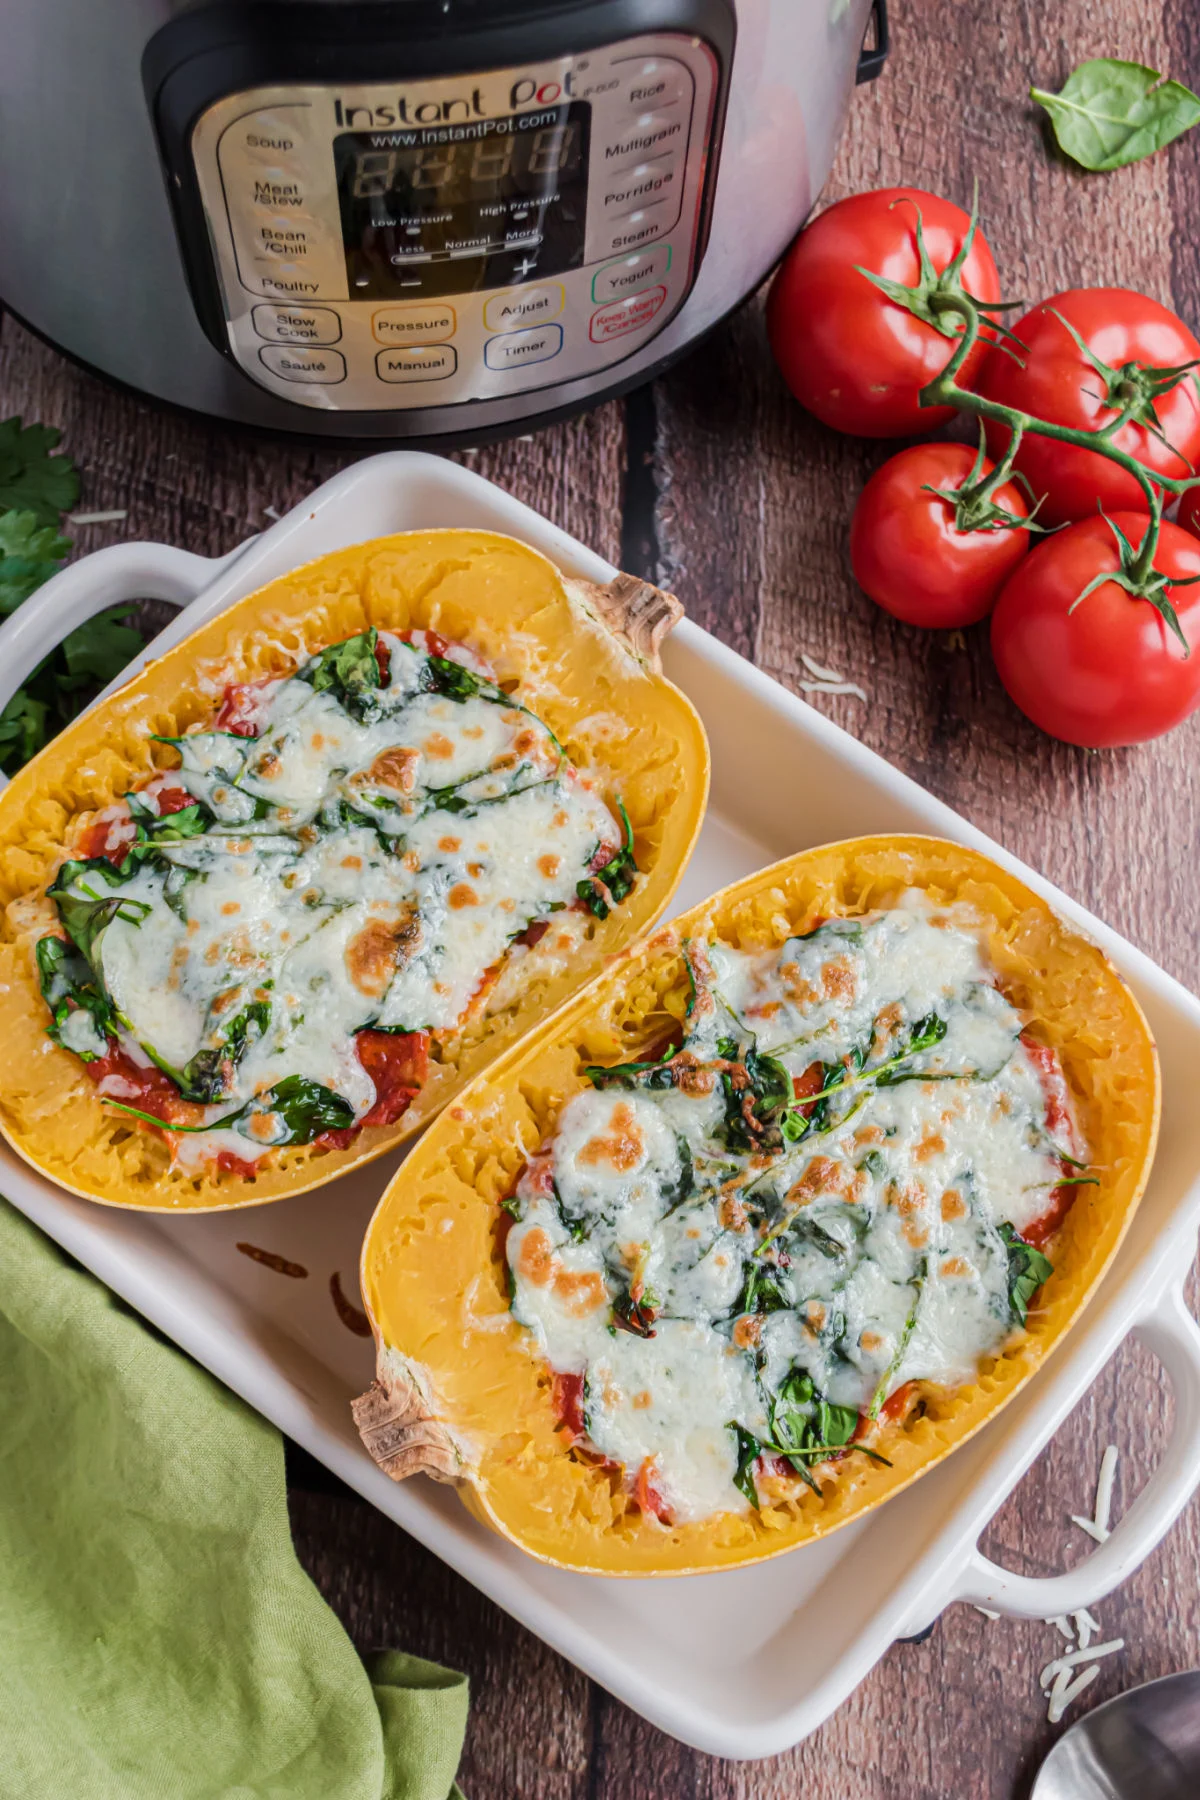 Spaghetti squash halves in a baking dish topped with melted cheese.